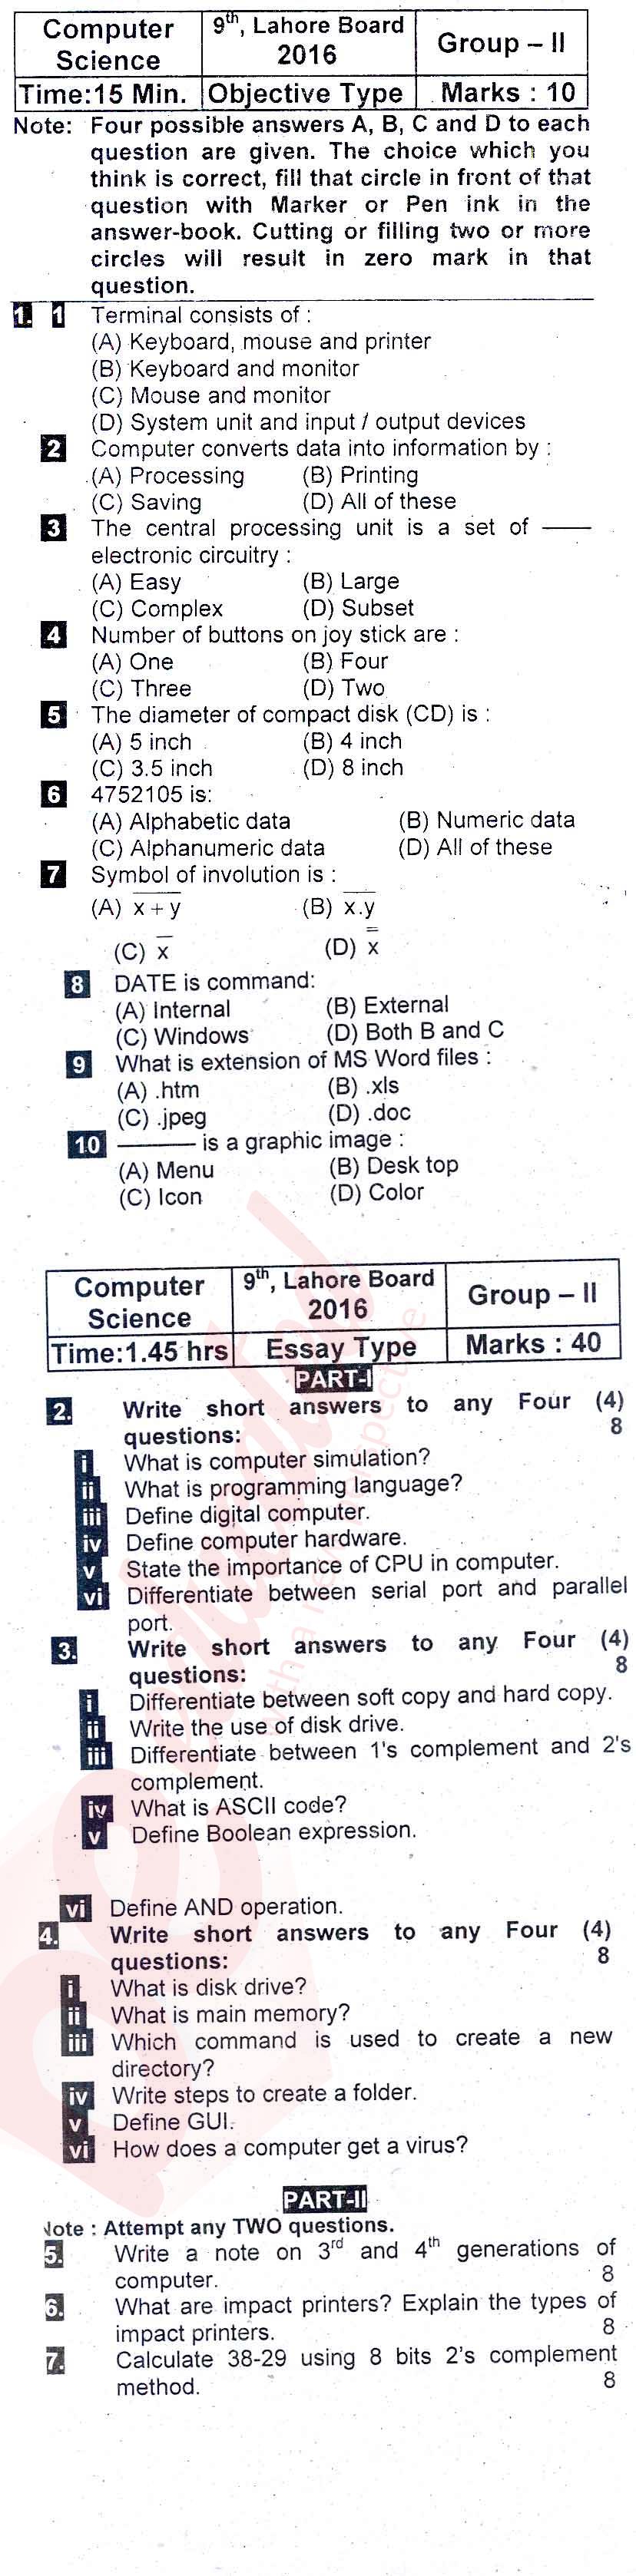 Computer Science 9th English Medium Past Paper Group 2 BISE Lahore 2016